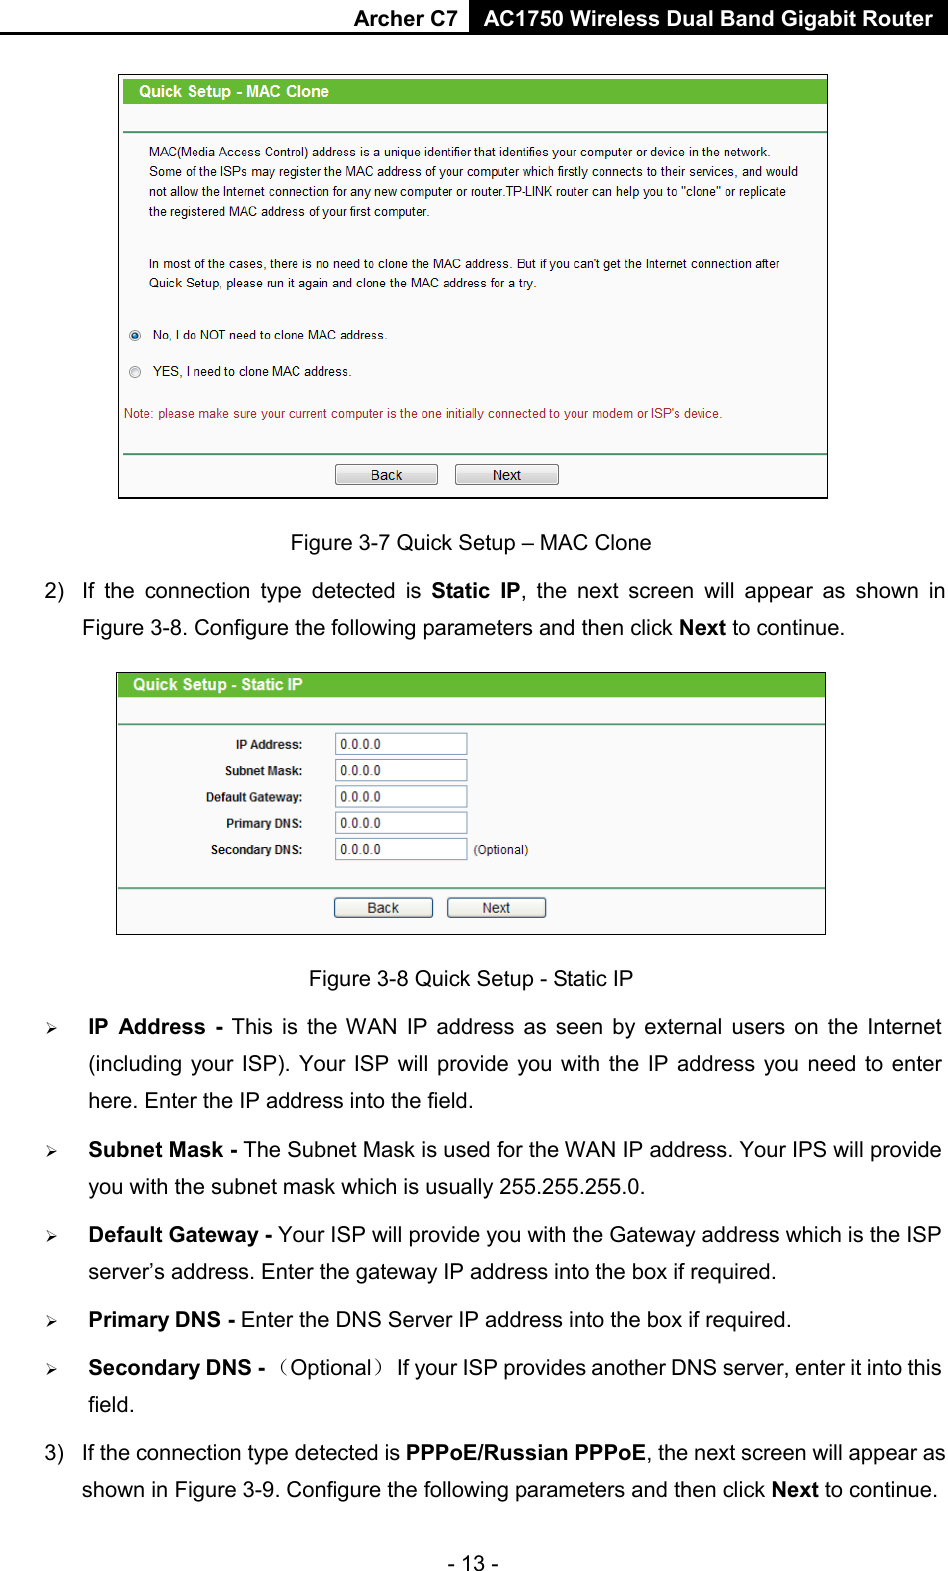 Archer C7 AC1750 Wireless Dual Band Gigabit Router  - 13 -  Figure 3-7 Quick Setup – MAC Clone 2)  If the connection type detected is Static IP,  the next screen will appear as shown in Figure 3-8. Configure the following parameters and then click Next to continue.  Figure 3-8 Quick Setup - Static IP  IP Address - This is the WAN IP address as seen by external users on the Internet (including your ISP). Your ISP will provide you with the IP address you need to enter here. Enter the IP address into the field.  Subnet Mask - The Subnet Mask is used for the WAN IP address. Your IPS will provide you with the subnet mask which is usually 255.255.255.0.  Default Gateway - Your ISP will provide you with the Gateway address which is the ISP server’s address. Enter the gateway IP address into the box if required.  Primary DNS - Enter the DNS Server IP address into the box if required.    Secondary DNS - （Optional） If your ISP provides another DNS server, enter it into this field. 3) If the connection type detected is PPPoE/Russian PPPoE, the next screen will appear as shown in Figure 3-9. Configure the following parameters and then click Next to continue. 